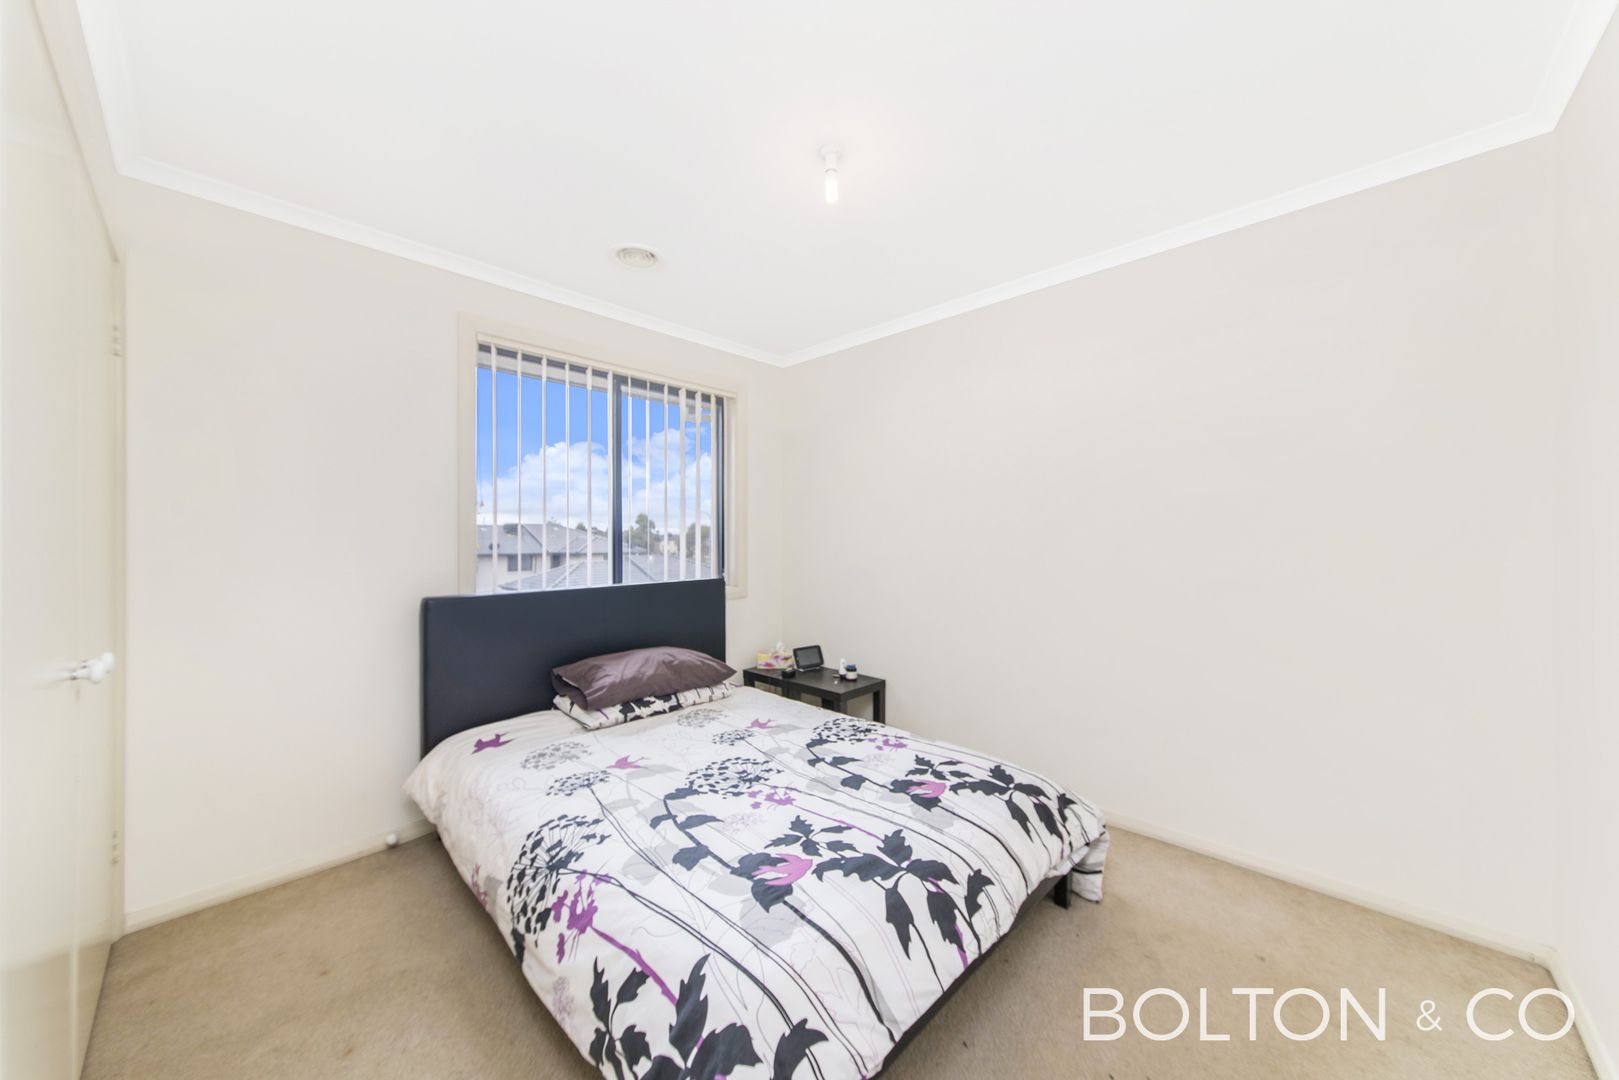 65 Mary Gillespie Ave, Gungahlin ACT 2912, Image 2